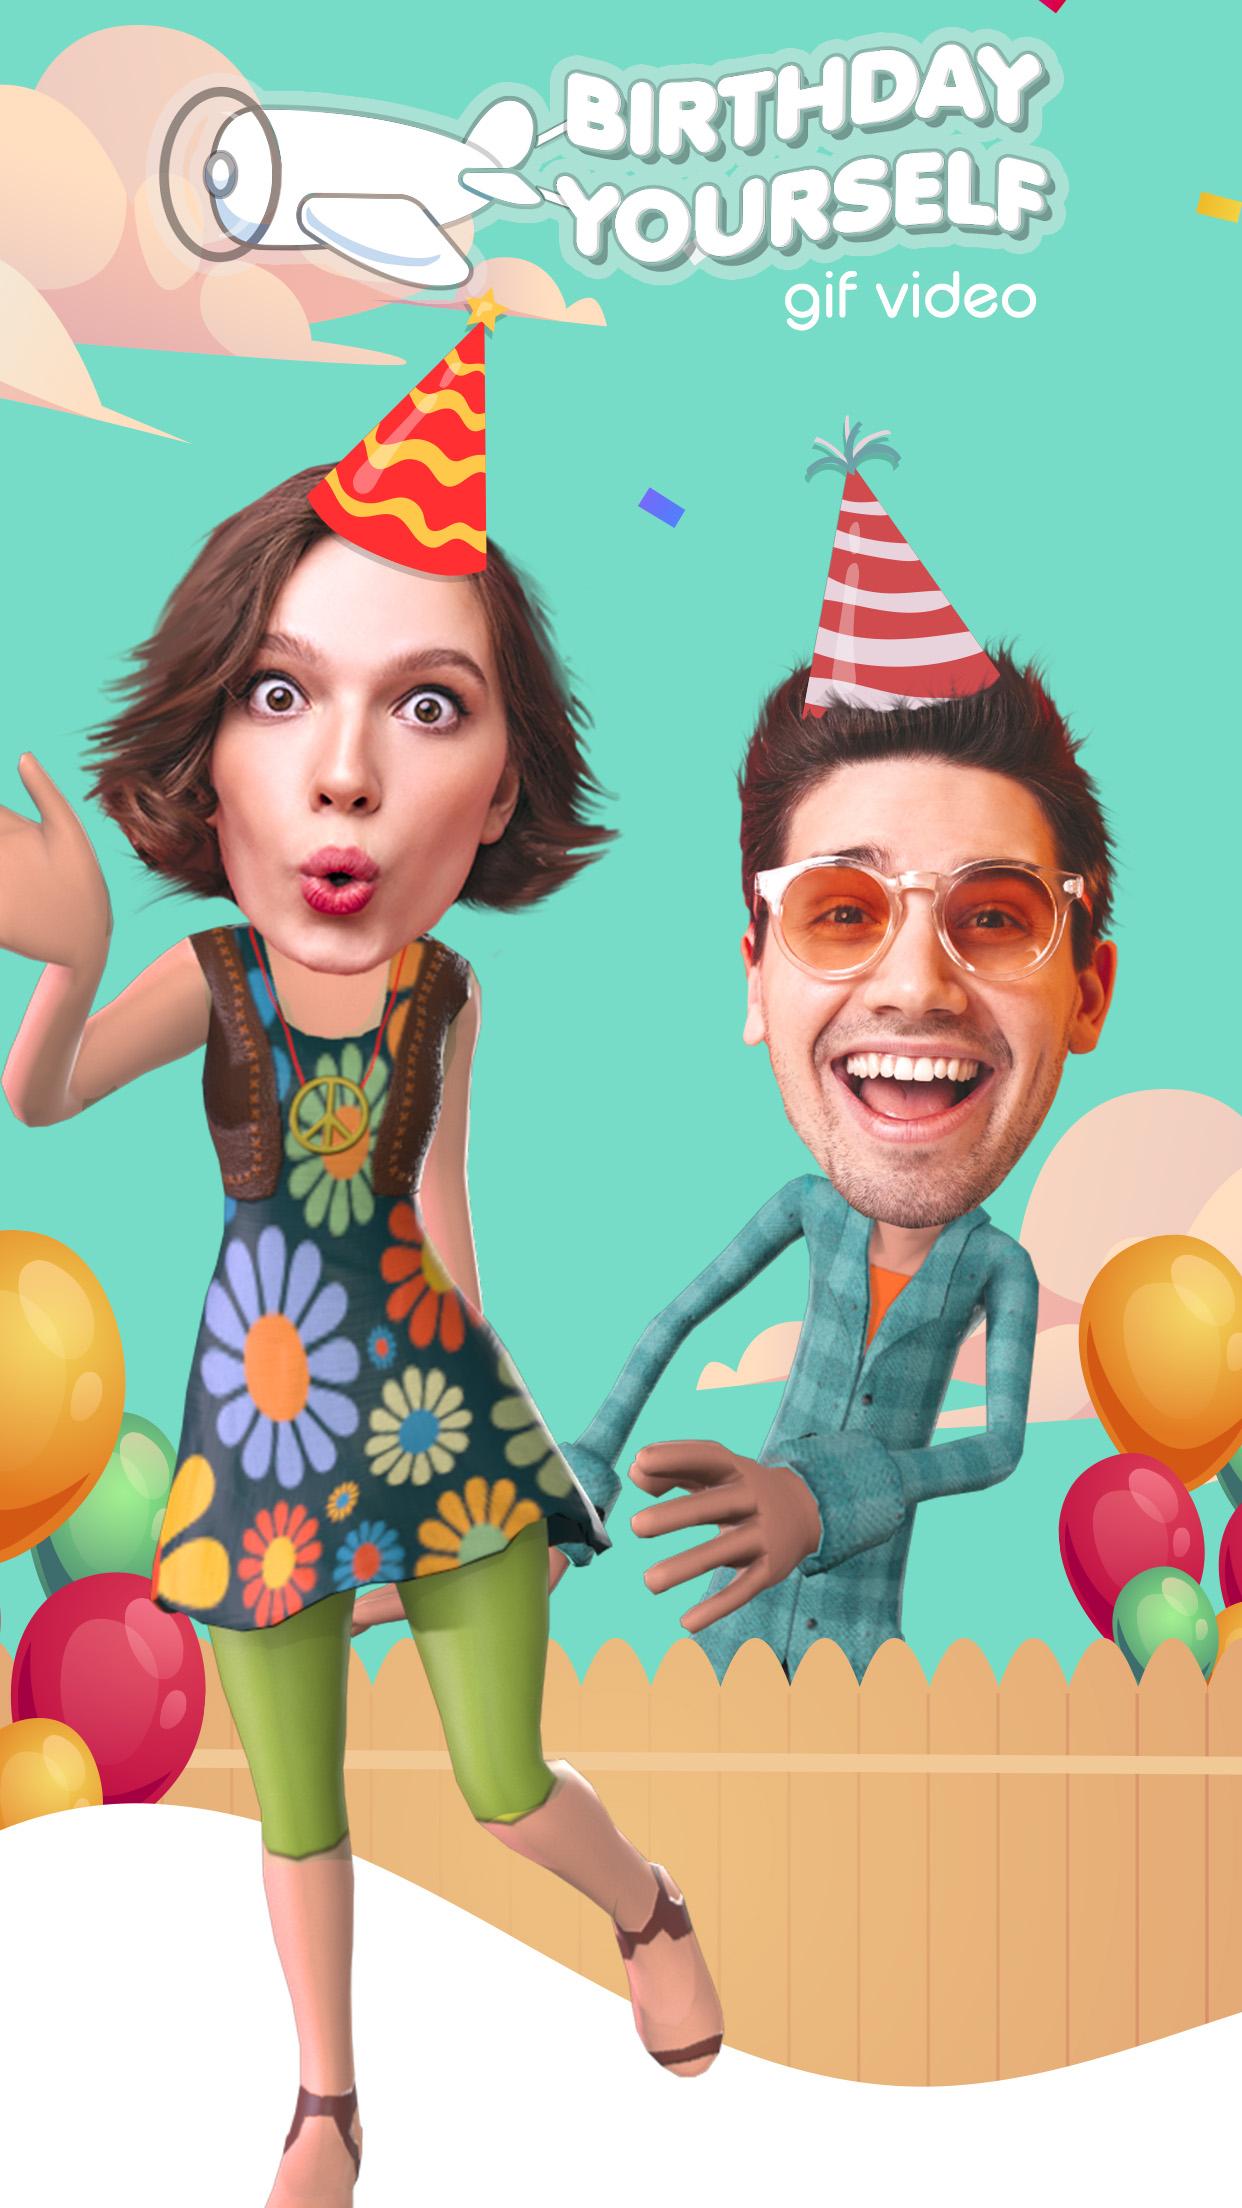 Birthday Yourself - put your face in 3D Gif vide 4 Screenshot 11